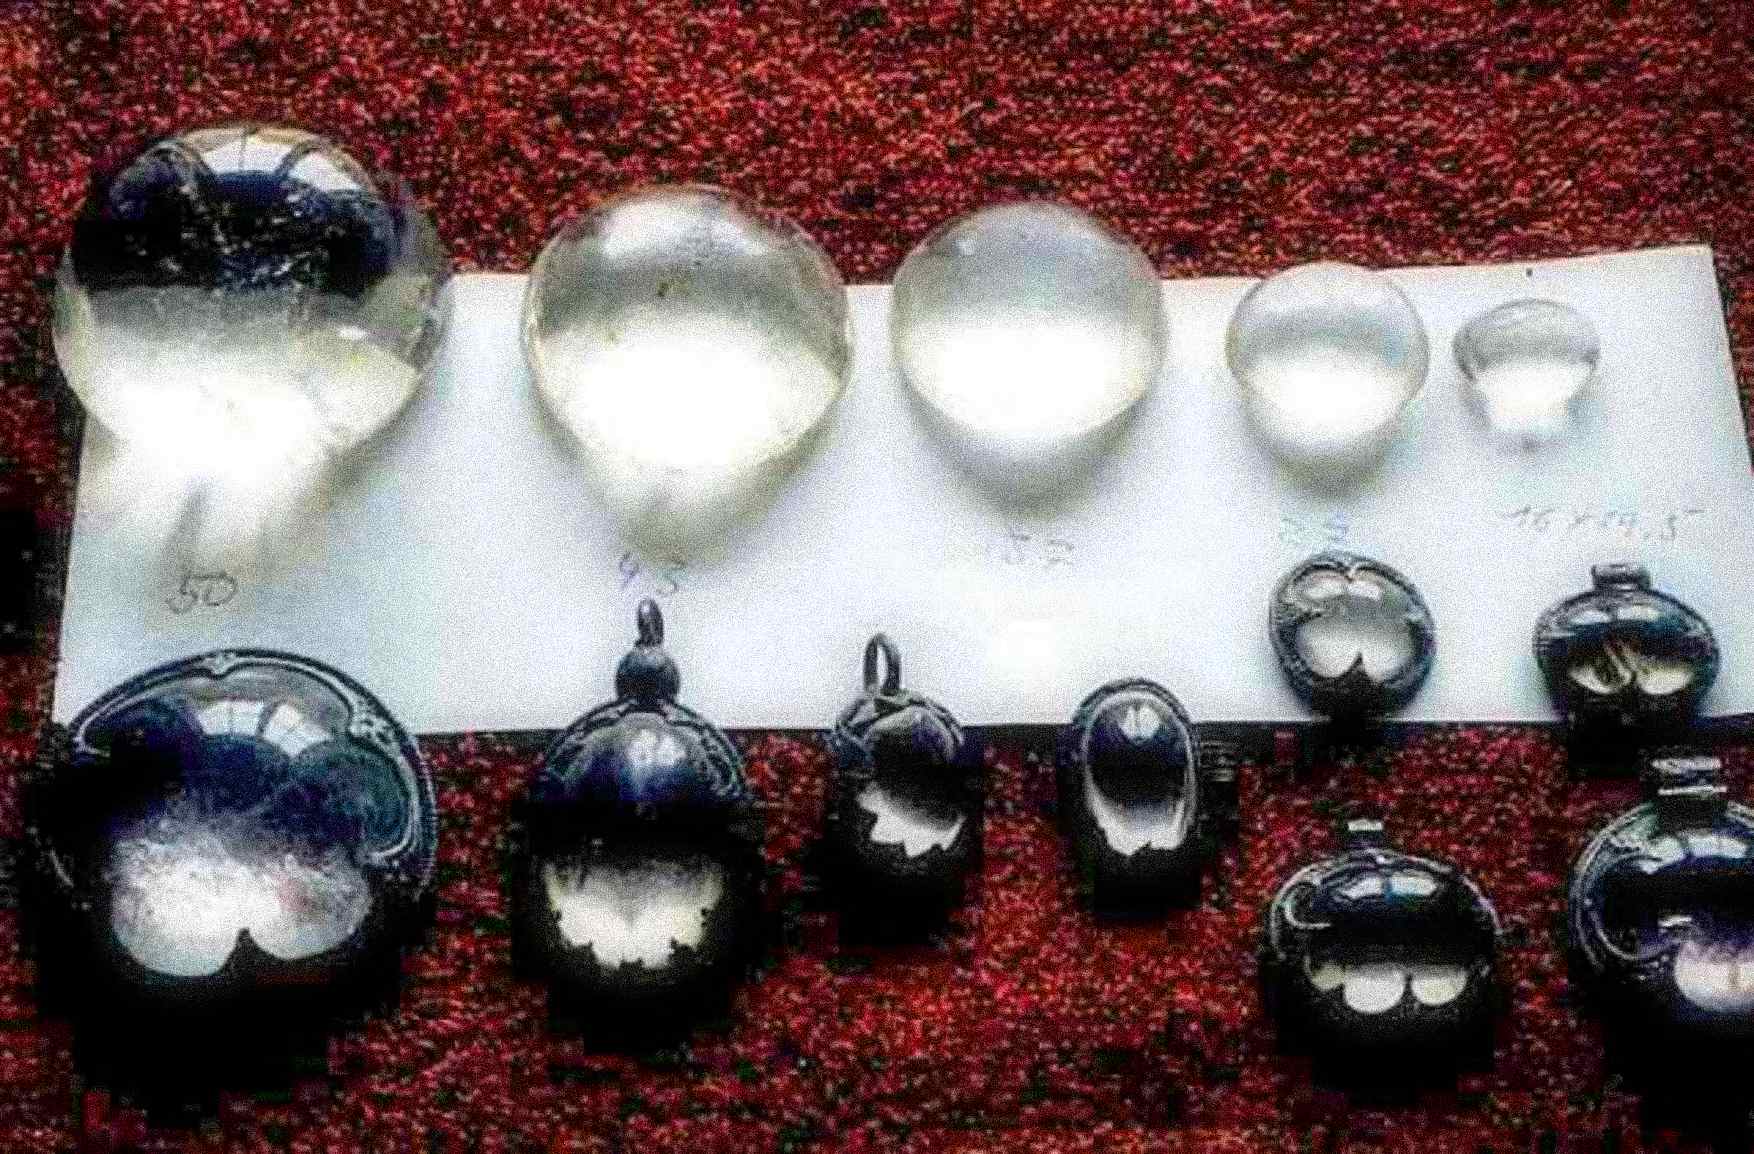 The lenses examined in Visby. Top row: unmounted lenses. Bottom row: mounted lenses, except the "ball". These lenses were initially thought to be ornaments.